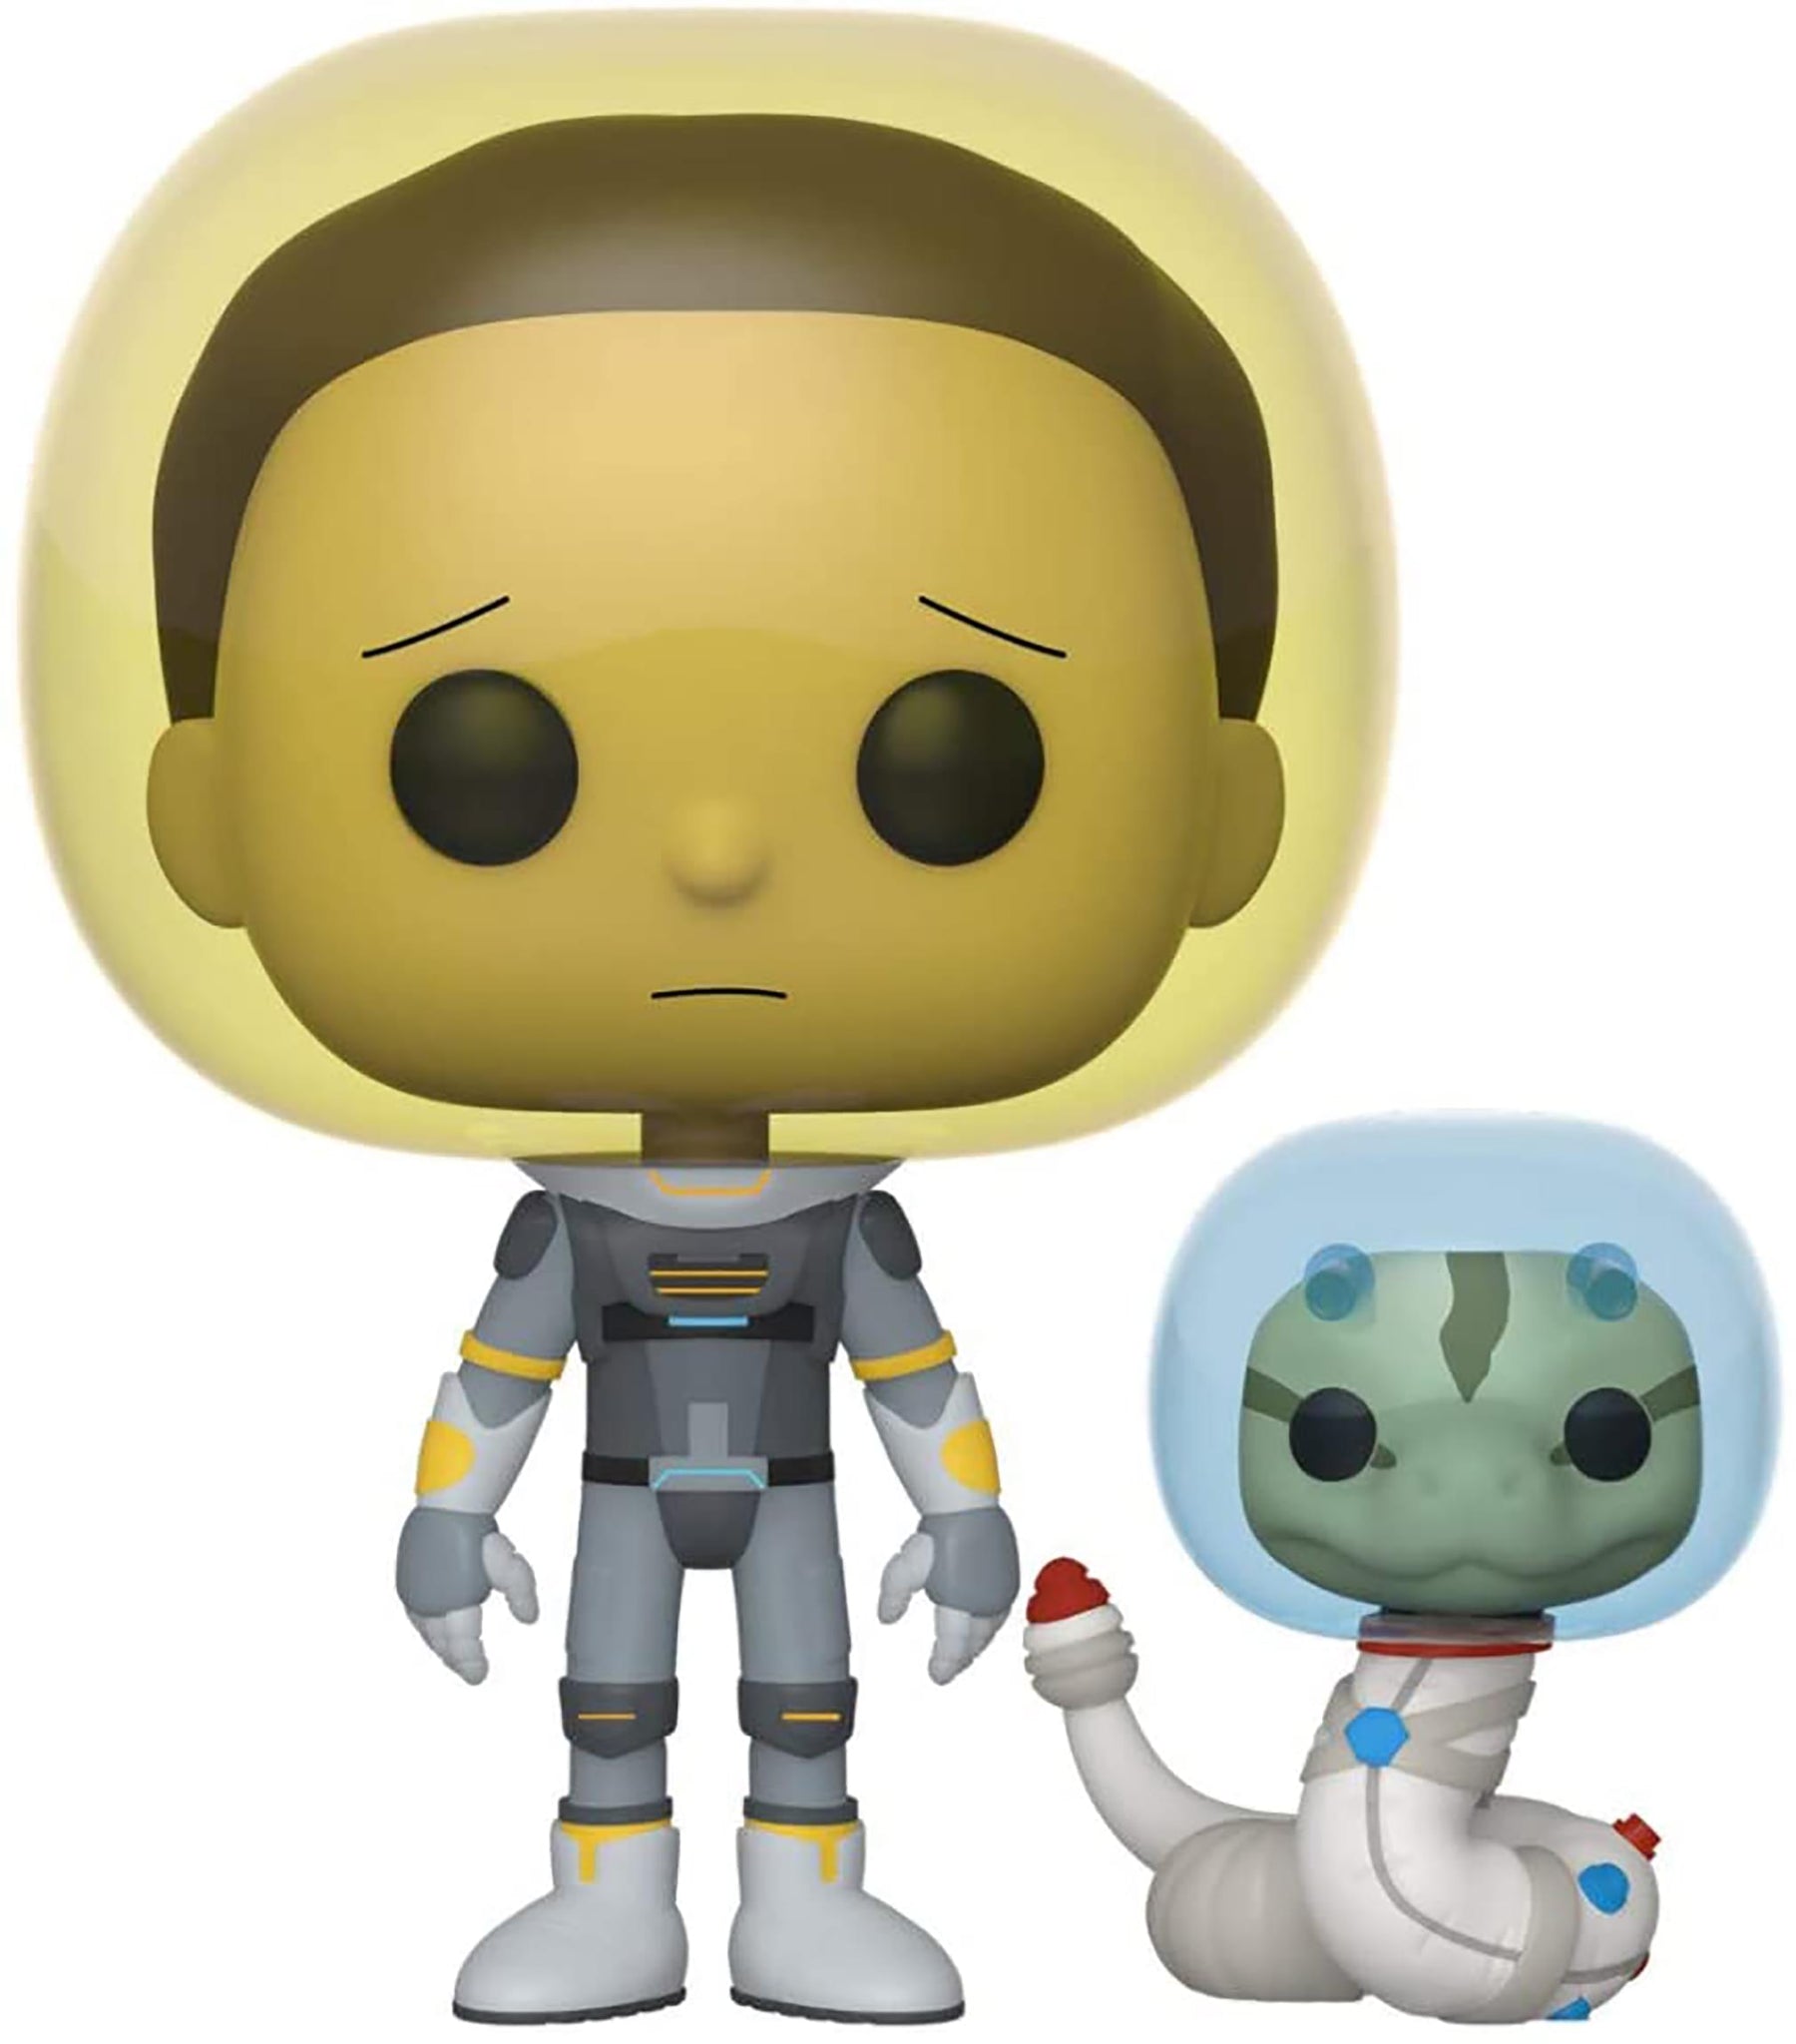 Rick and Morty Funko POP Vinyl Figure | Space Suit Morty w/ Snake